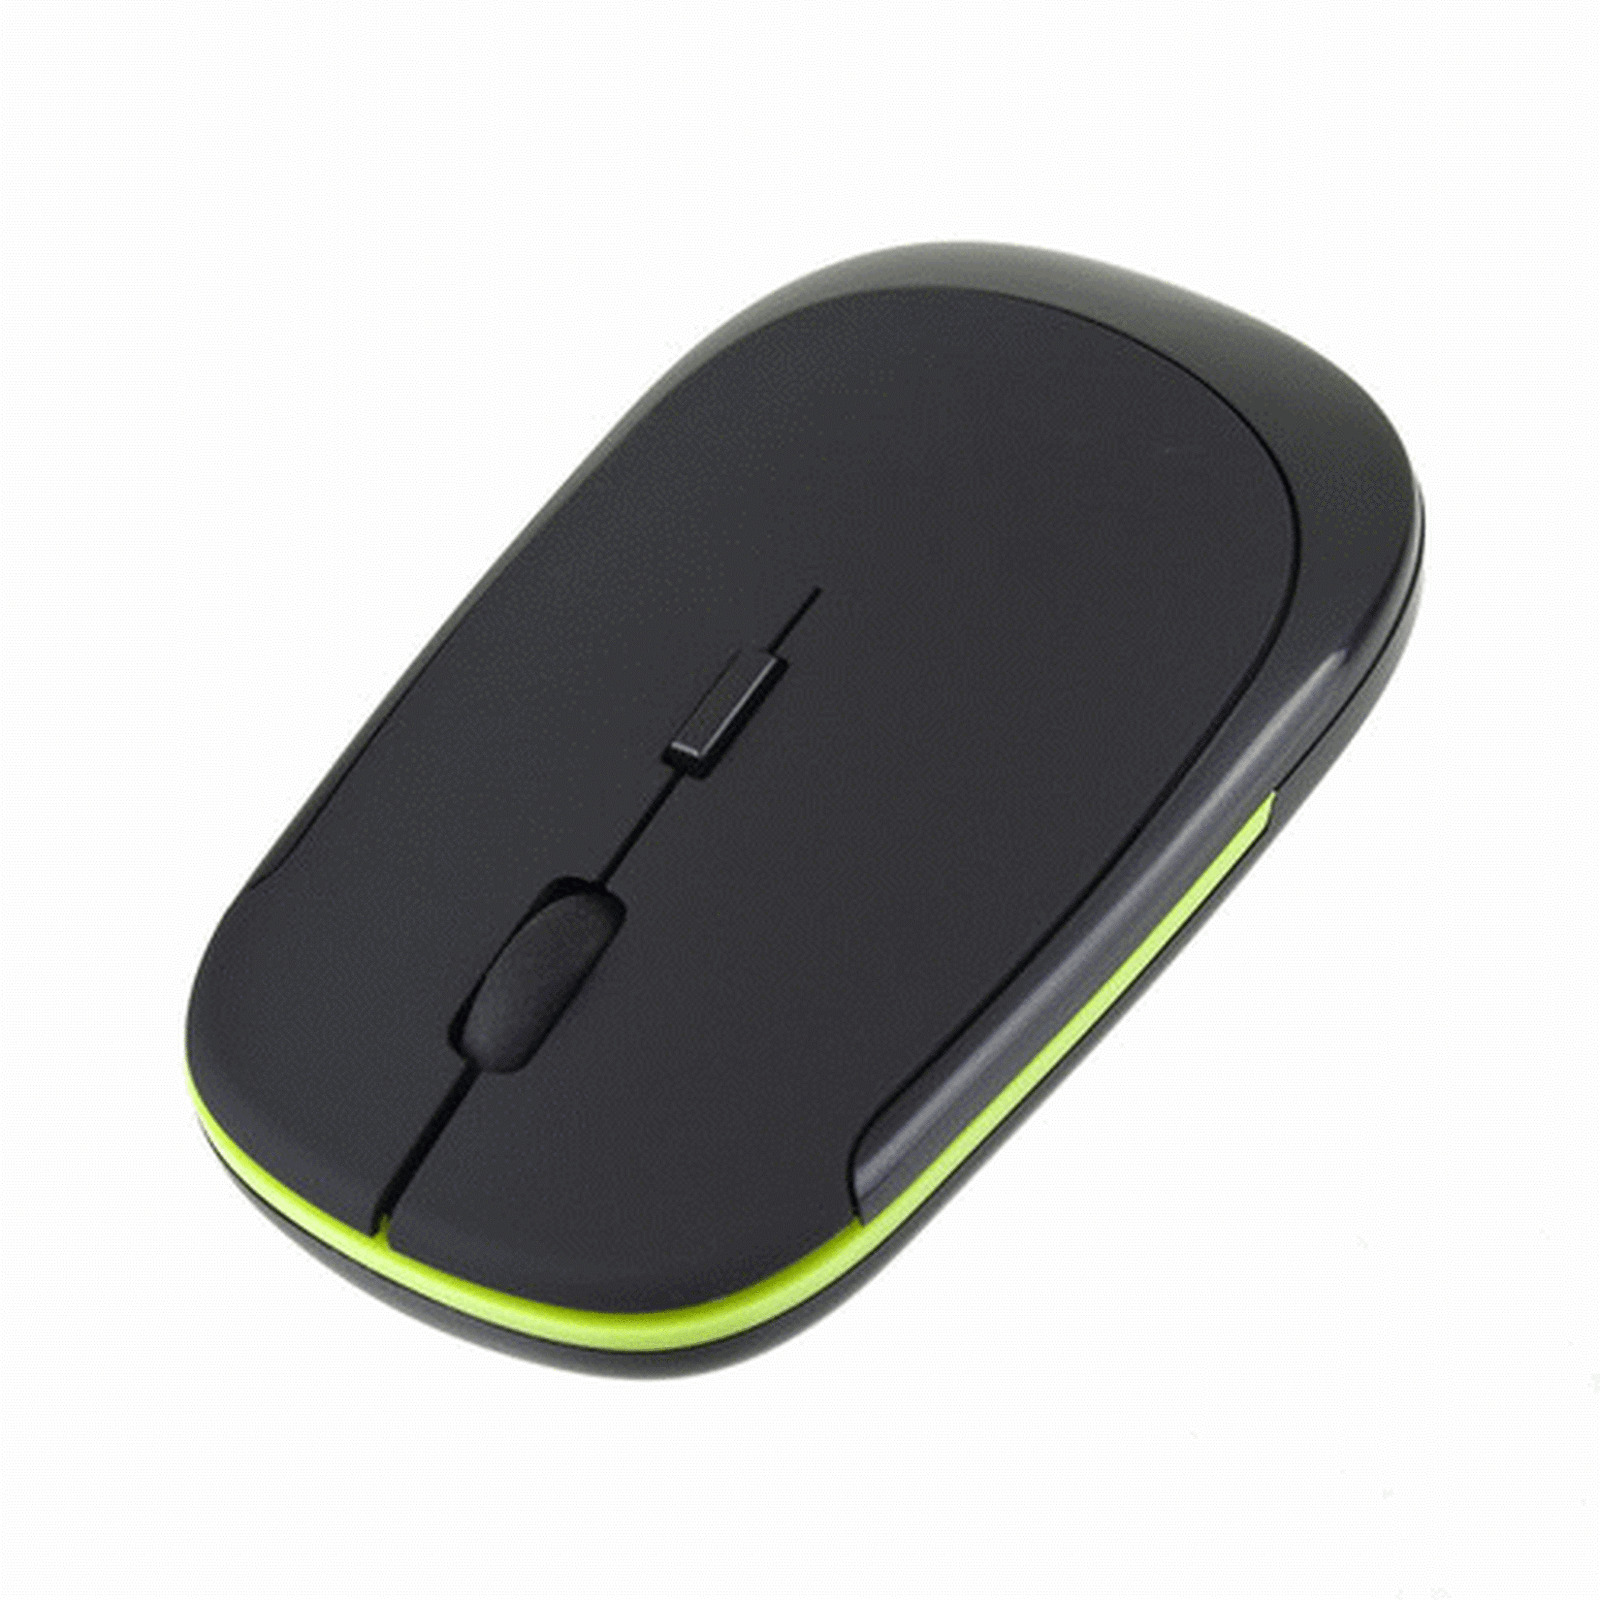 New Slim USB Optical Wireless Mouse 2.4G For PC Computer Laptop Netbook 251